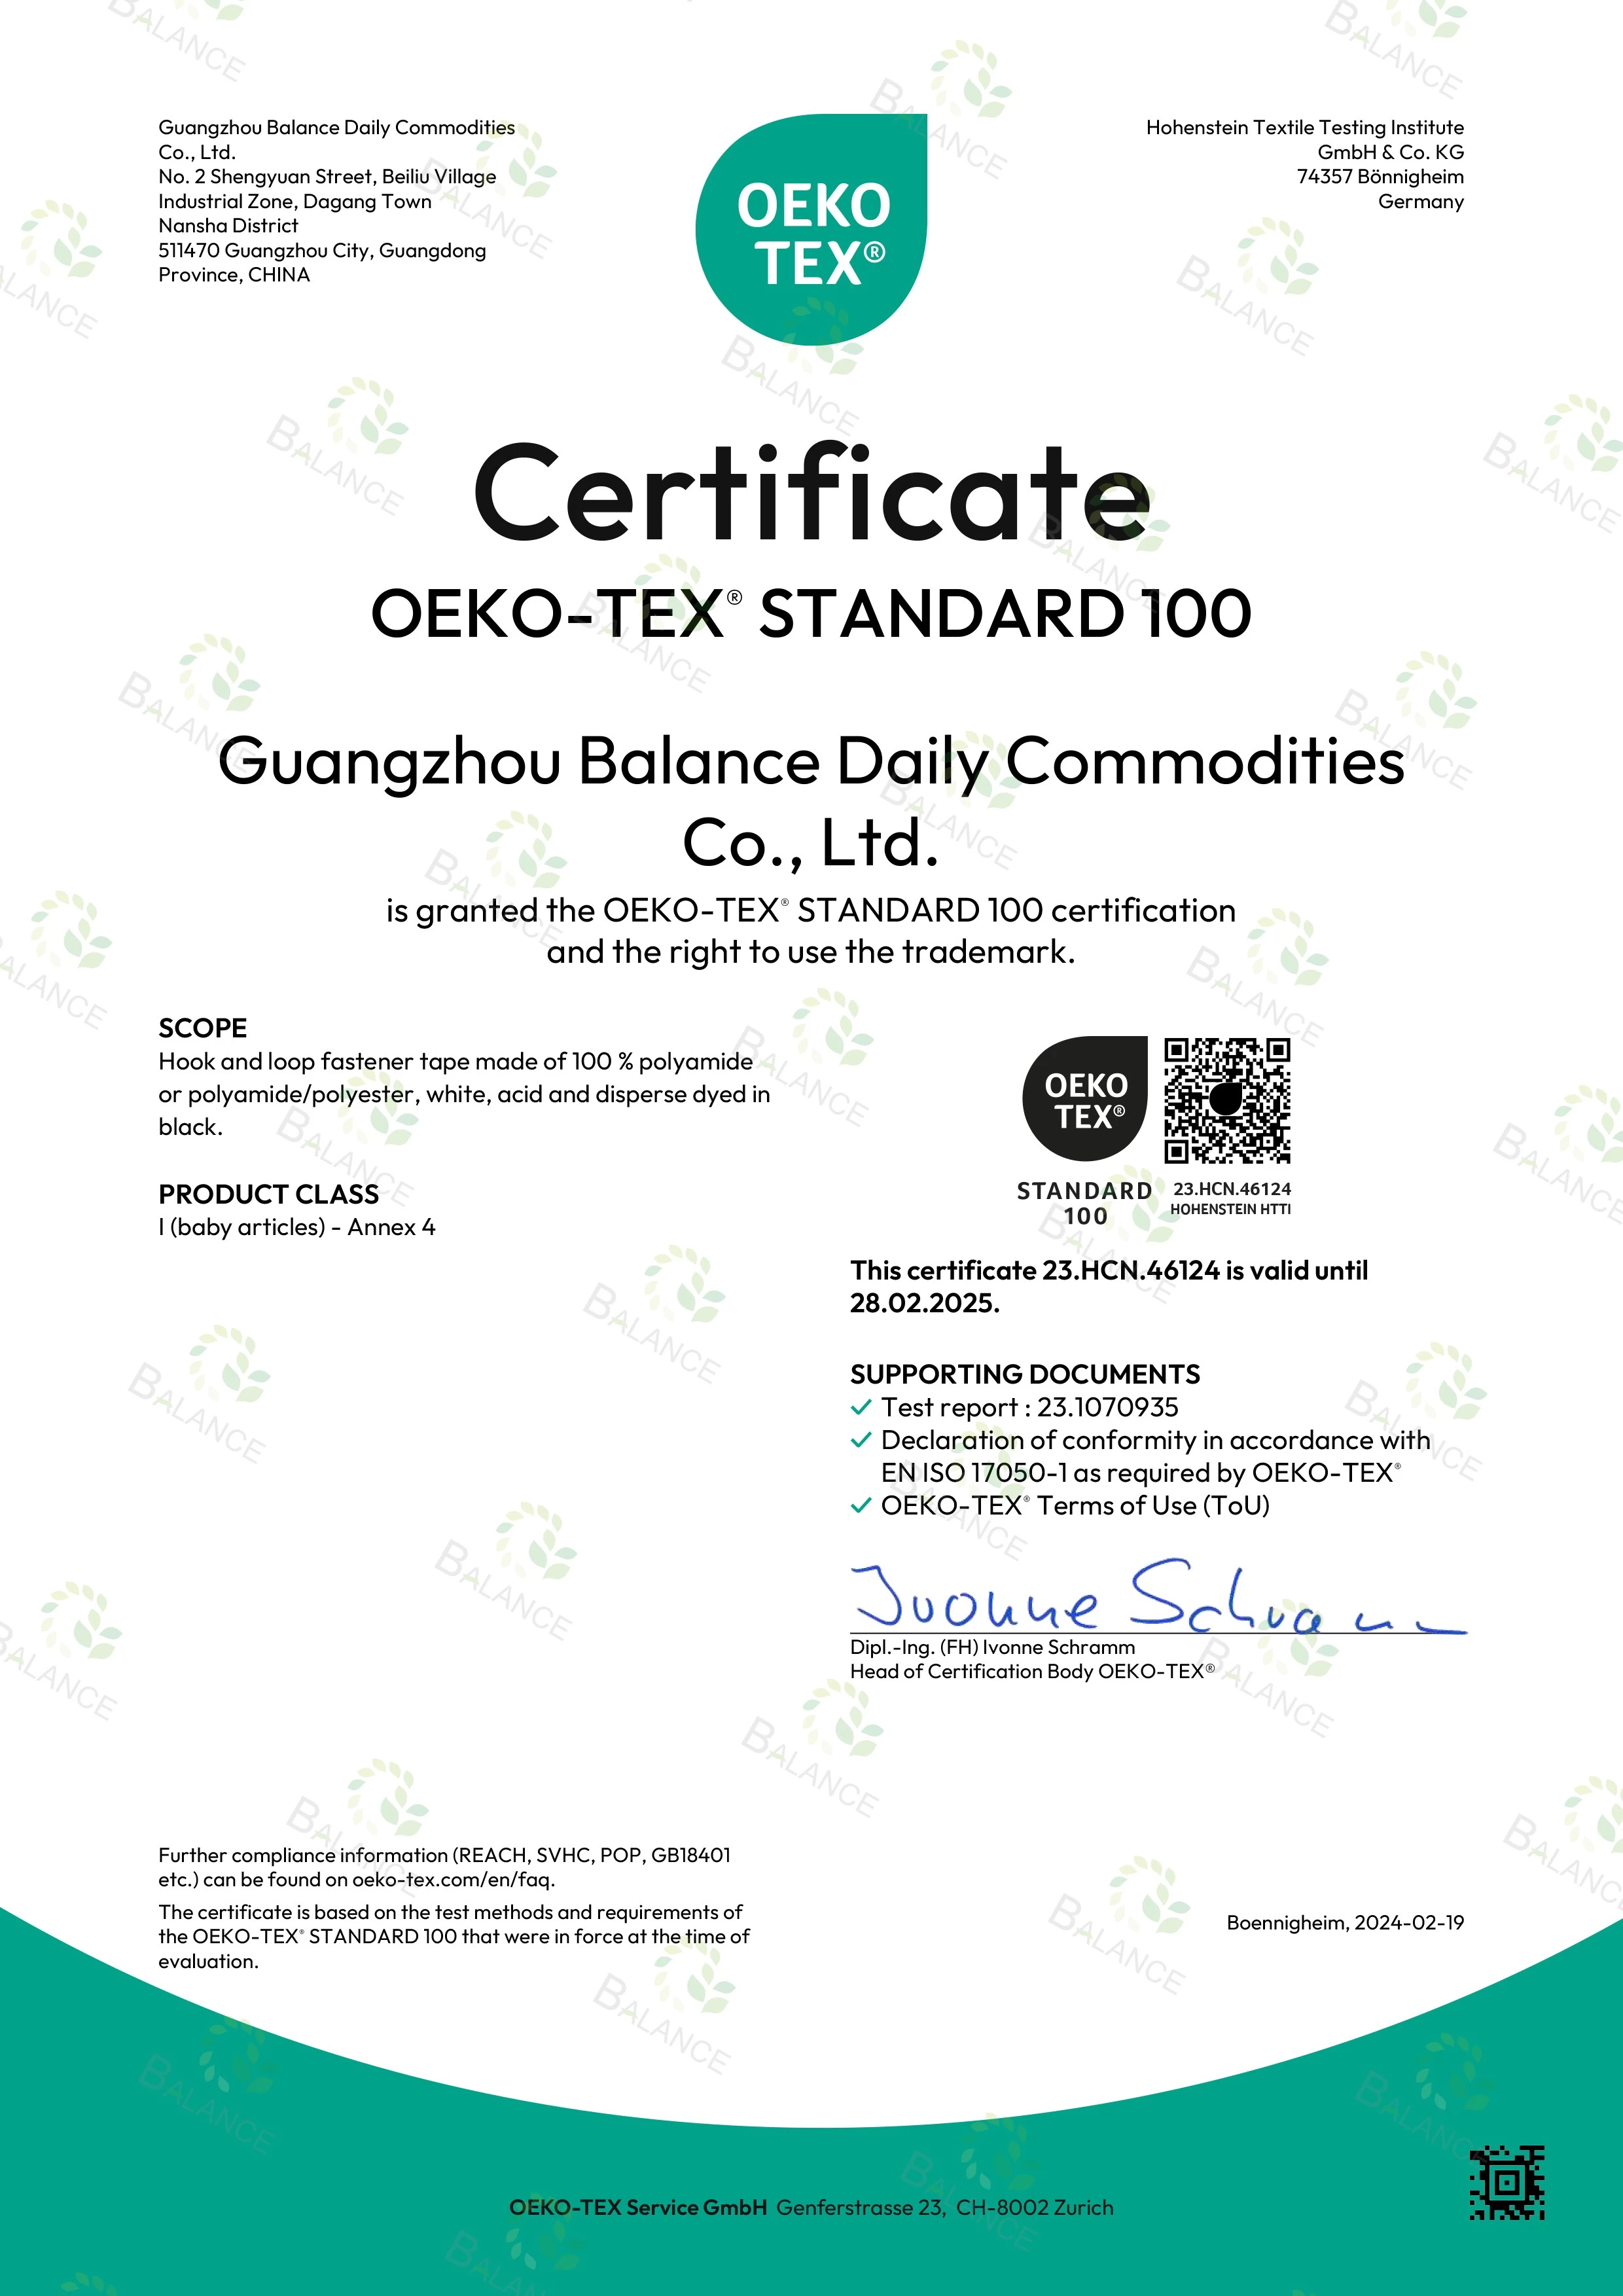 Exciting News! Our Hook & Loop Tapes Have Secured  the OEKO-TEX' STANDARD 100 certification 